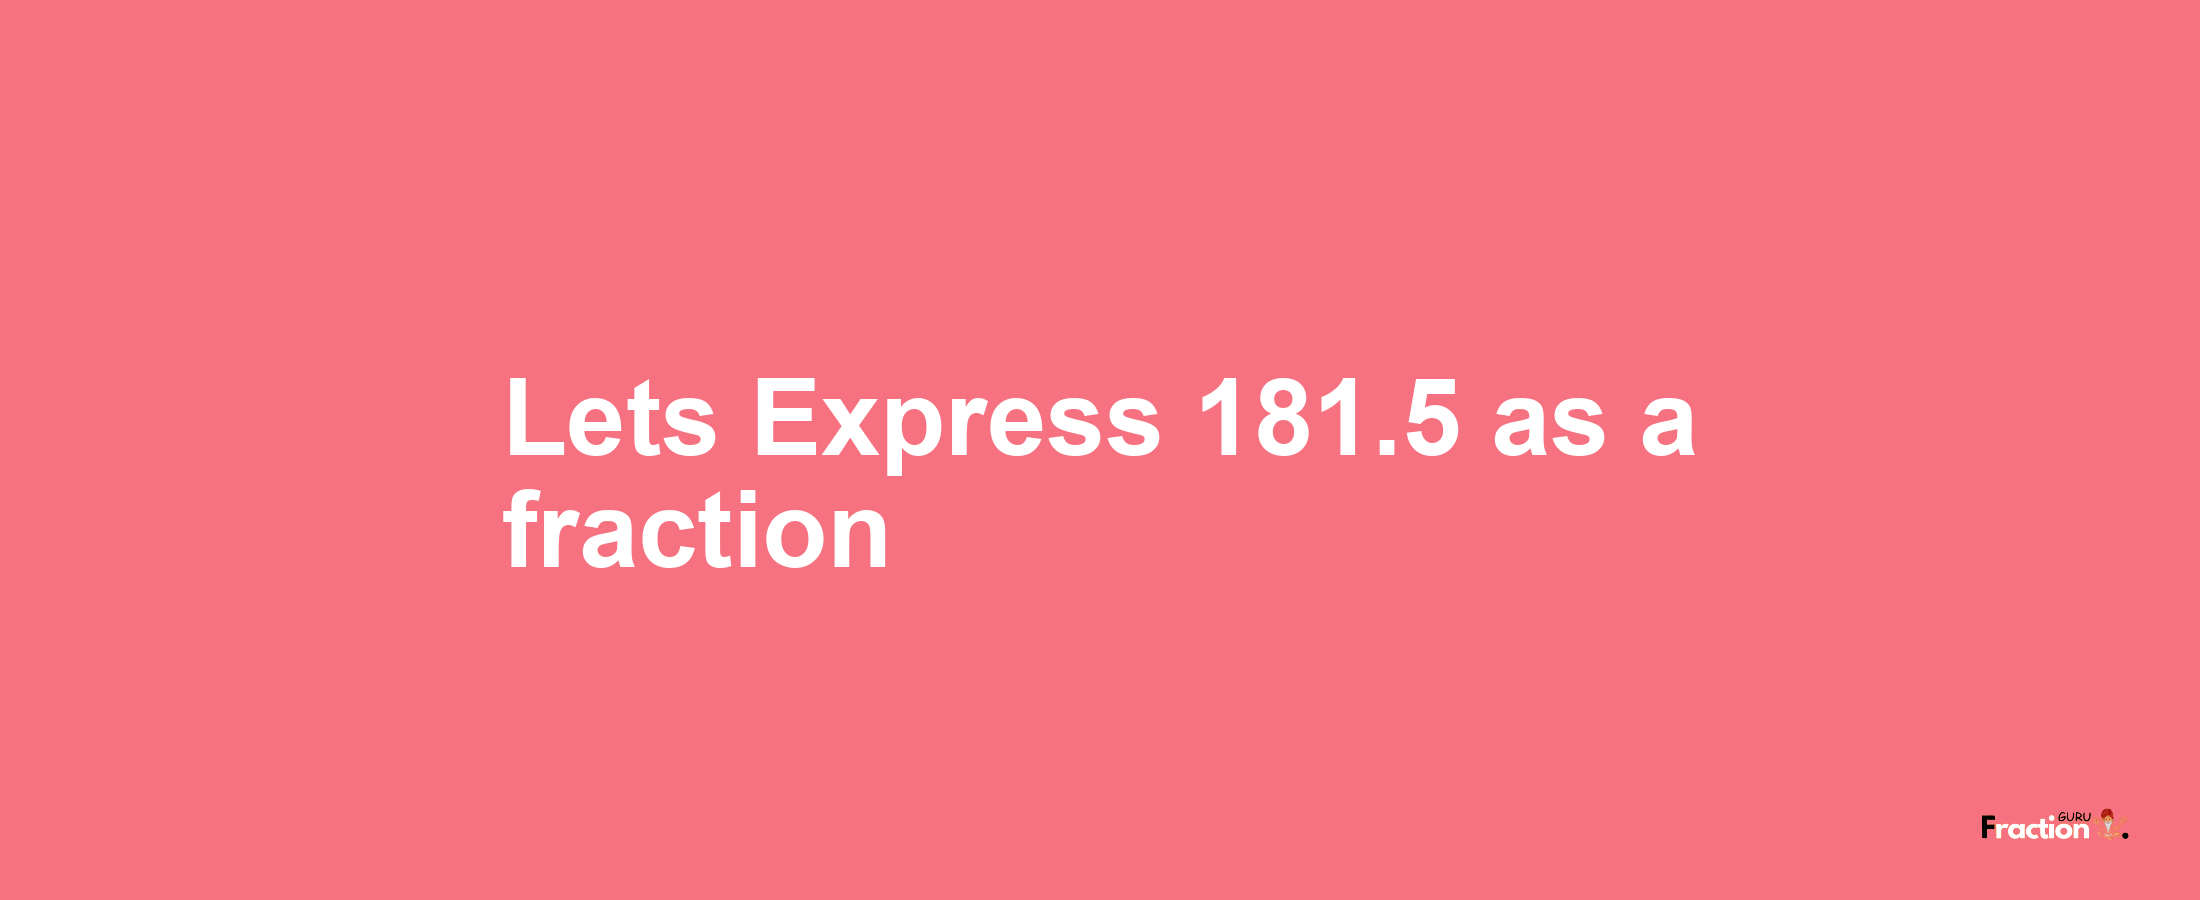 Lets Express 181.5 as afraction